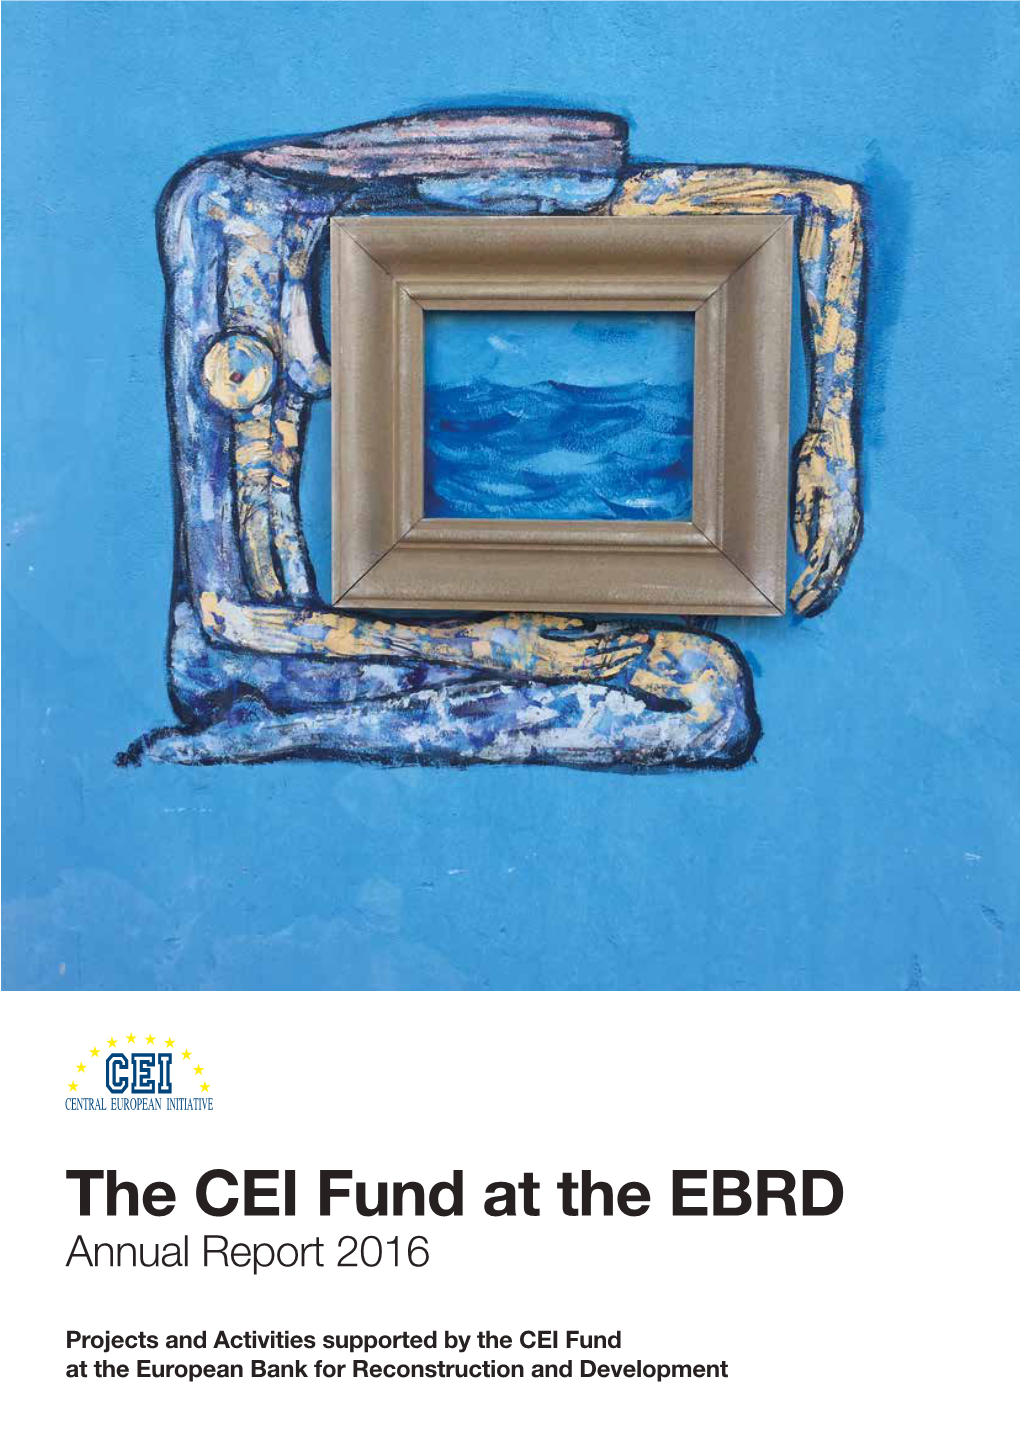 The CEI Fund at the EBRD Annual Report 2016